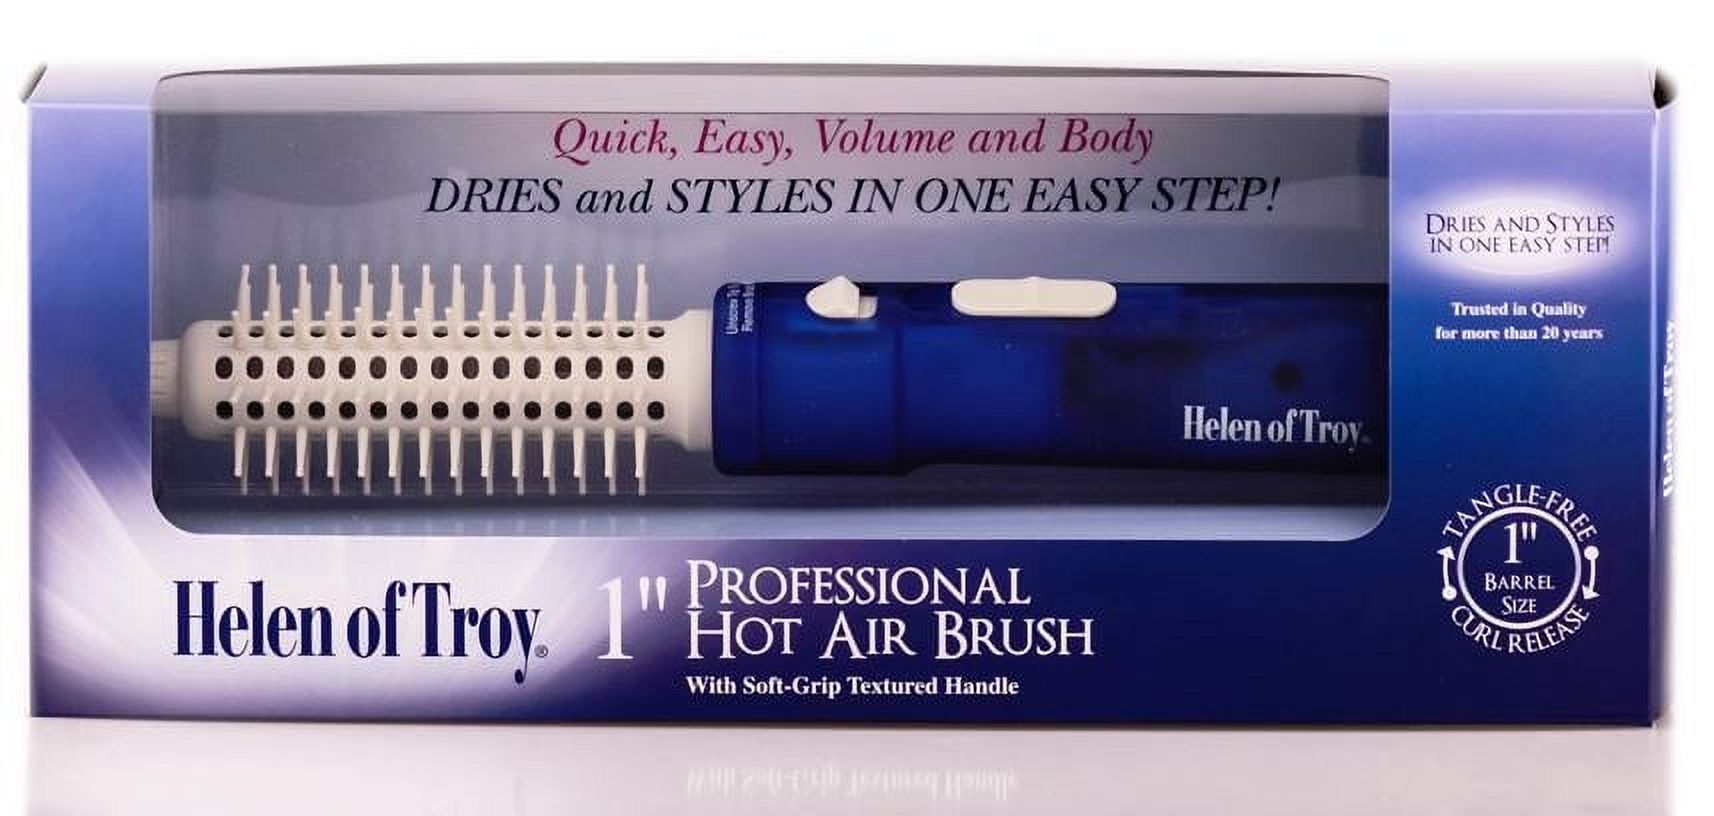 "Helen Of Troy Professional Hot Air Brush ( #1574 / 1"" inch)" - image 1 of 2